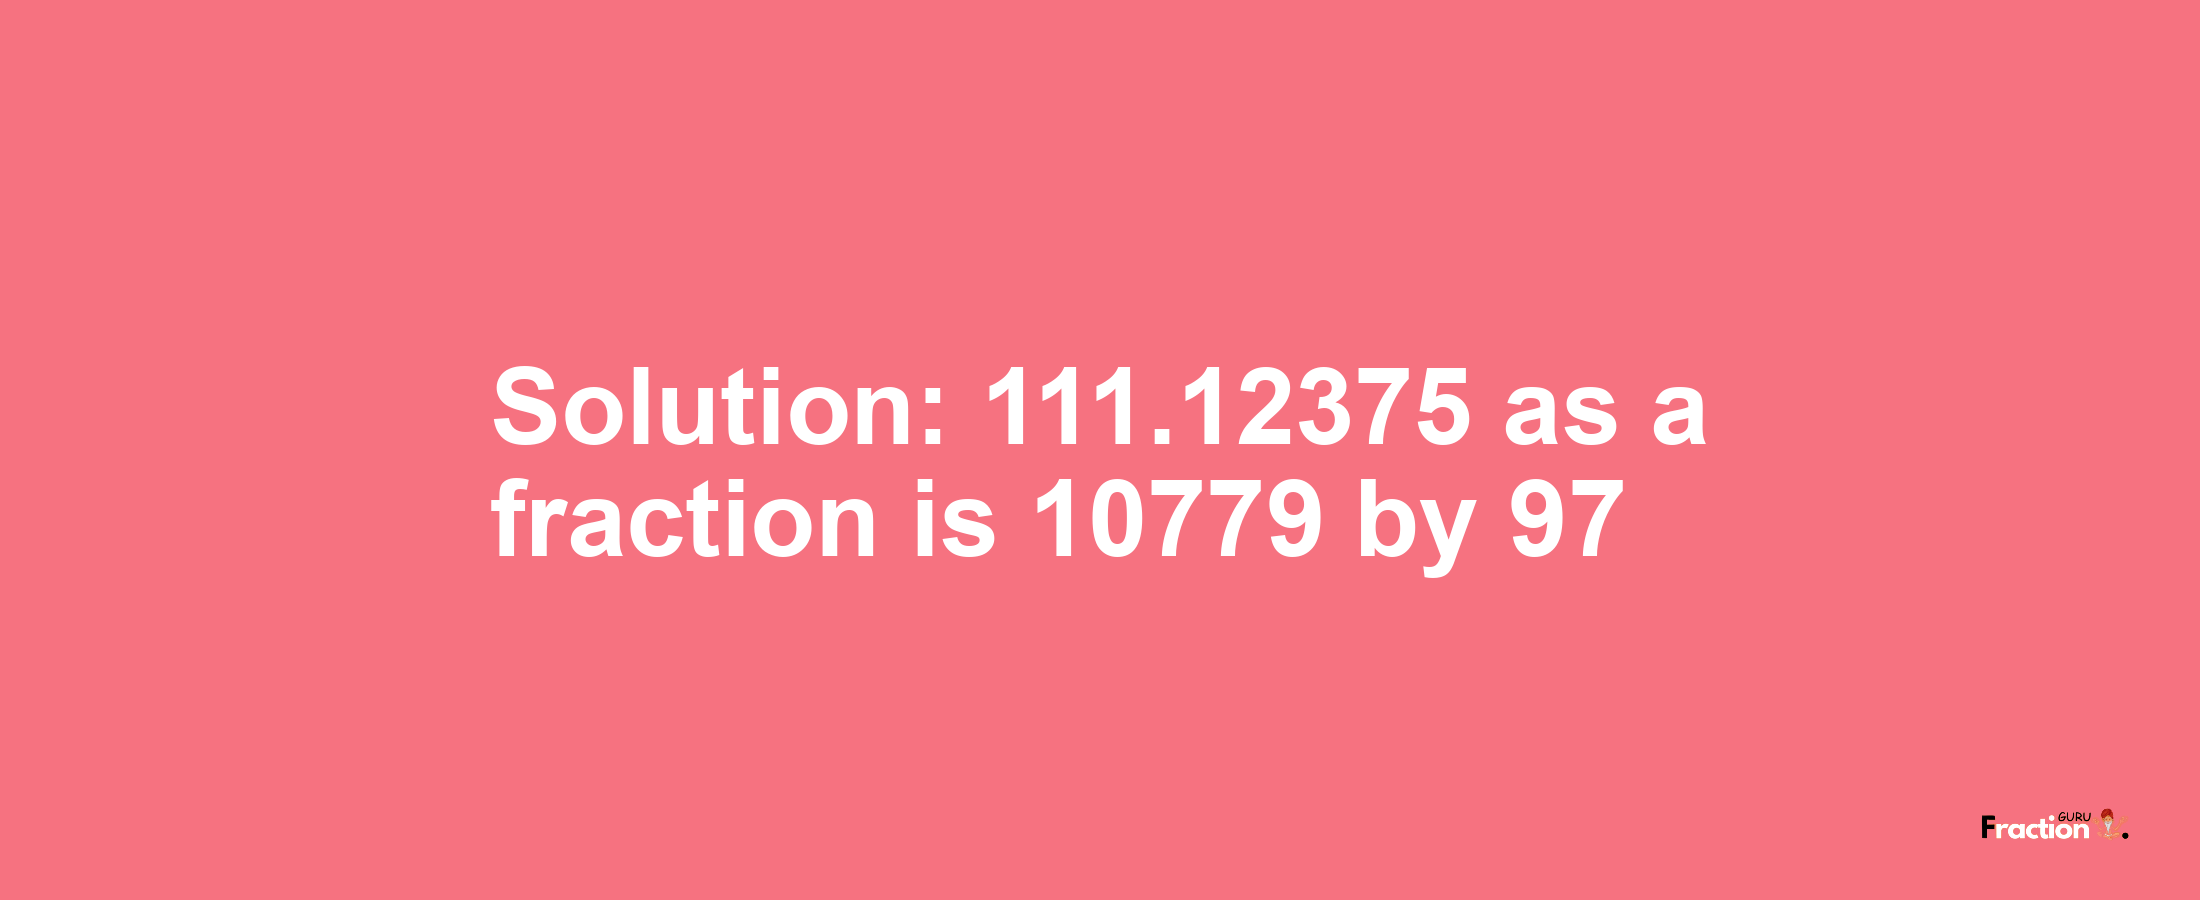 Solution:111.12375 as a fraction is 10779/97